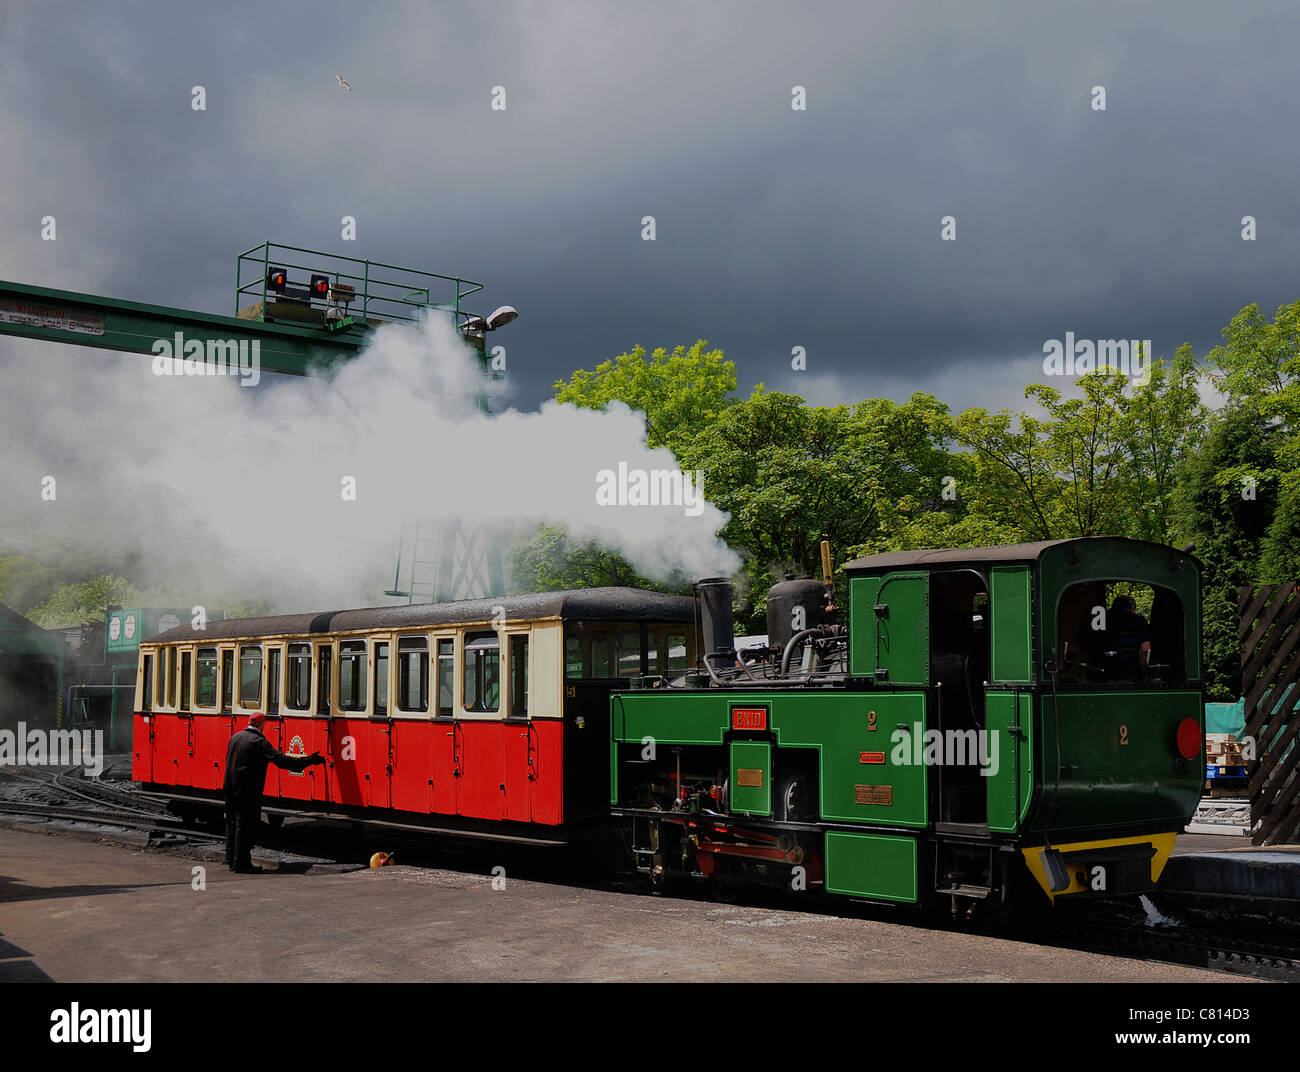 A STEAM TRAIN READY TO HAUL PASSENGERS TO THE SUMMIT OF MOUNT SNOWDON AT THE SNOWDON MOUNTAIN RAILWAY STATION AT LLANBERRIS, NOR Stock Photo